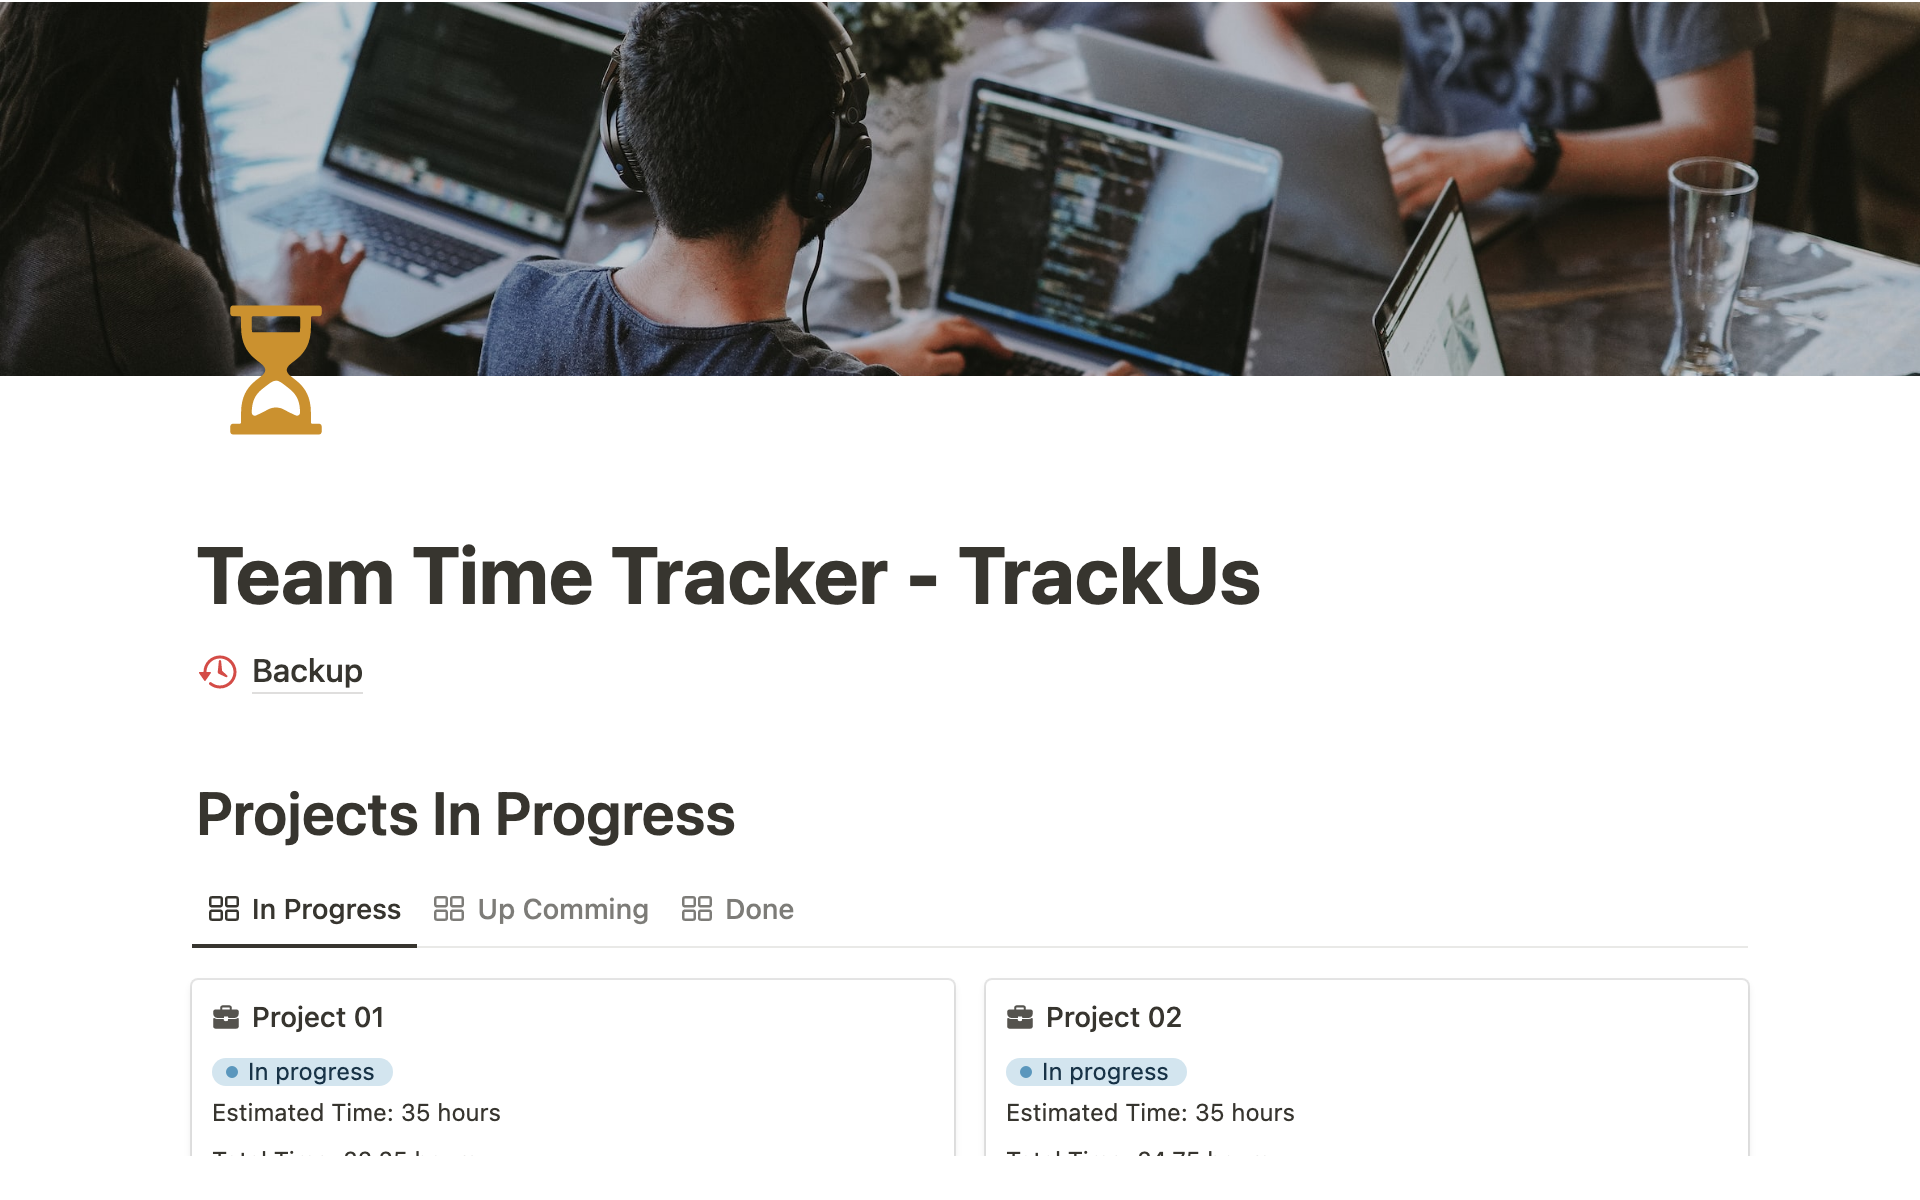 TrackUs is a complete reporting system for teams to write better and faster invoices and facilitate payroll preparation.